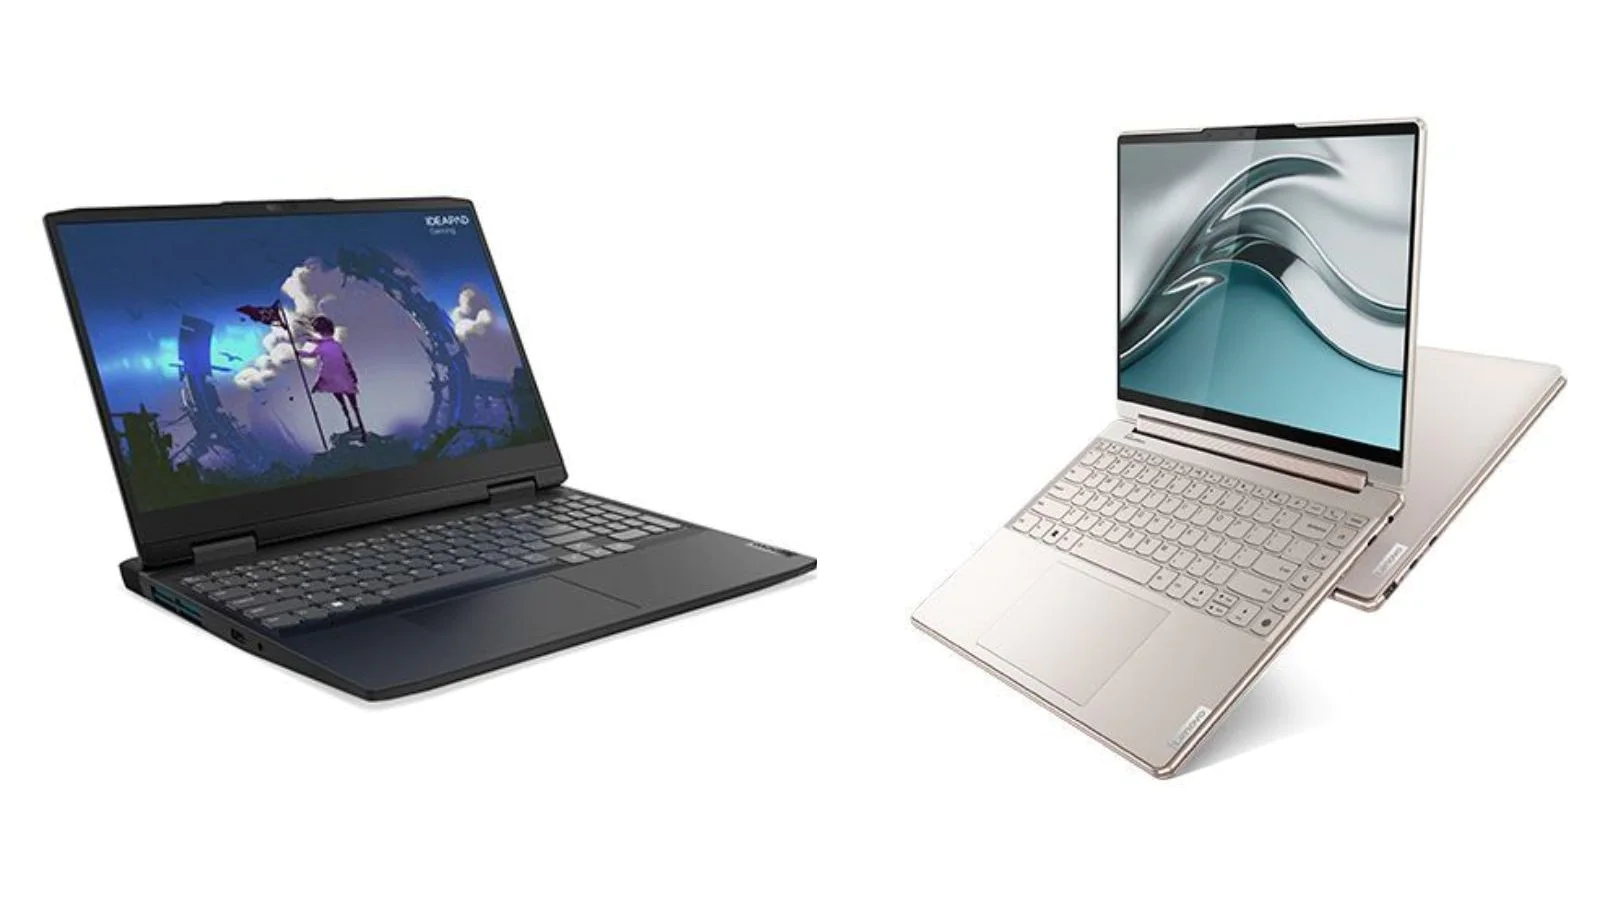 Lenovo Launches New Yoga, Legion And IdeaPad Gaming Laptops in India: Prices, Features And More